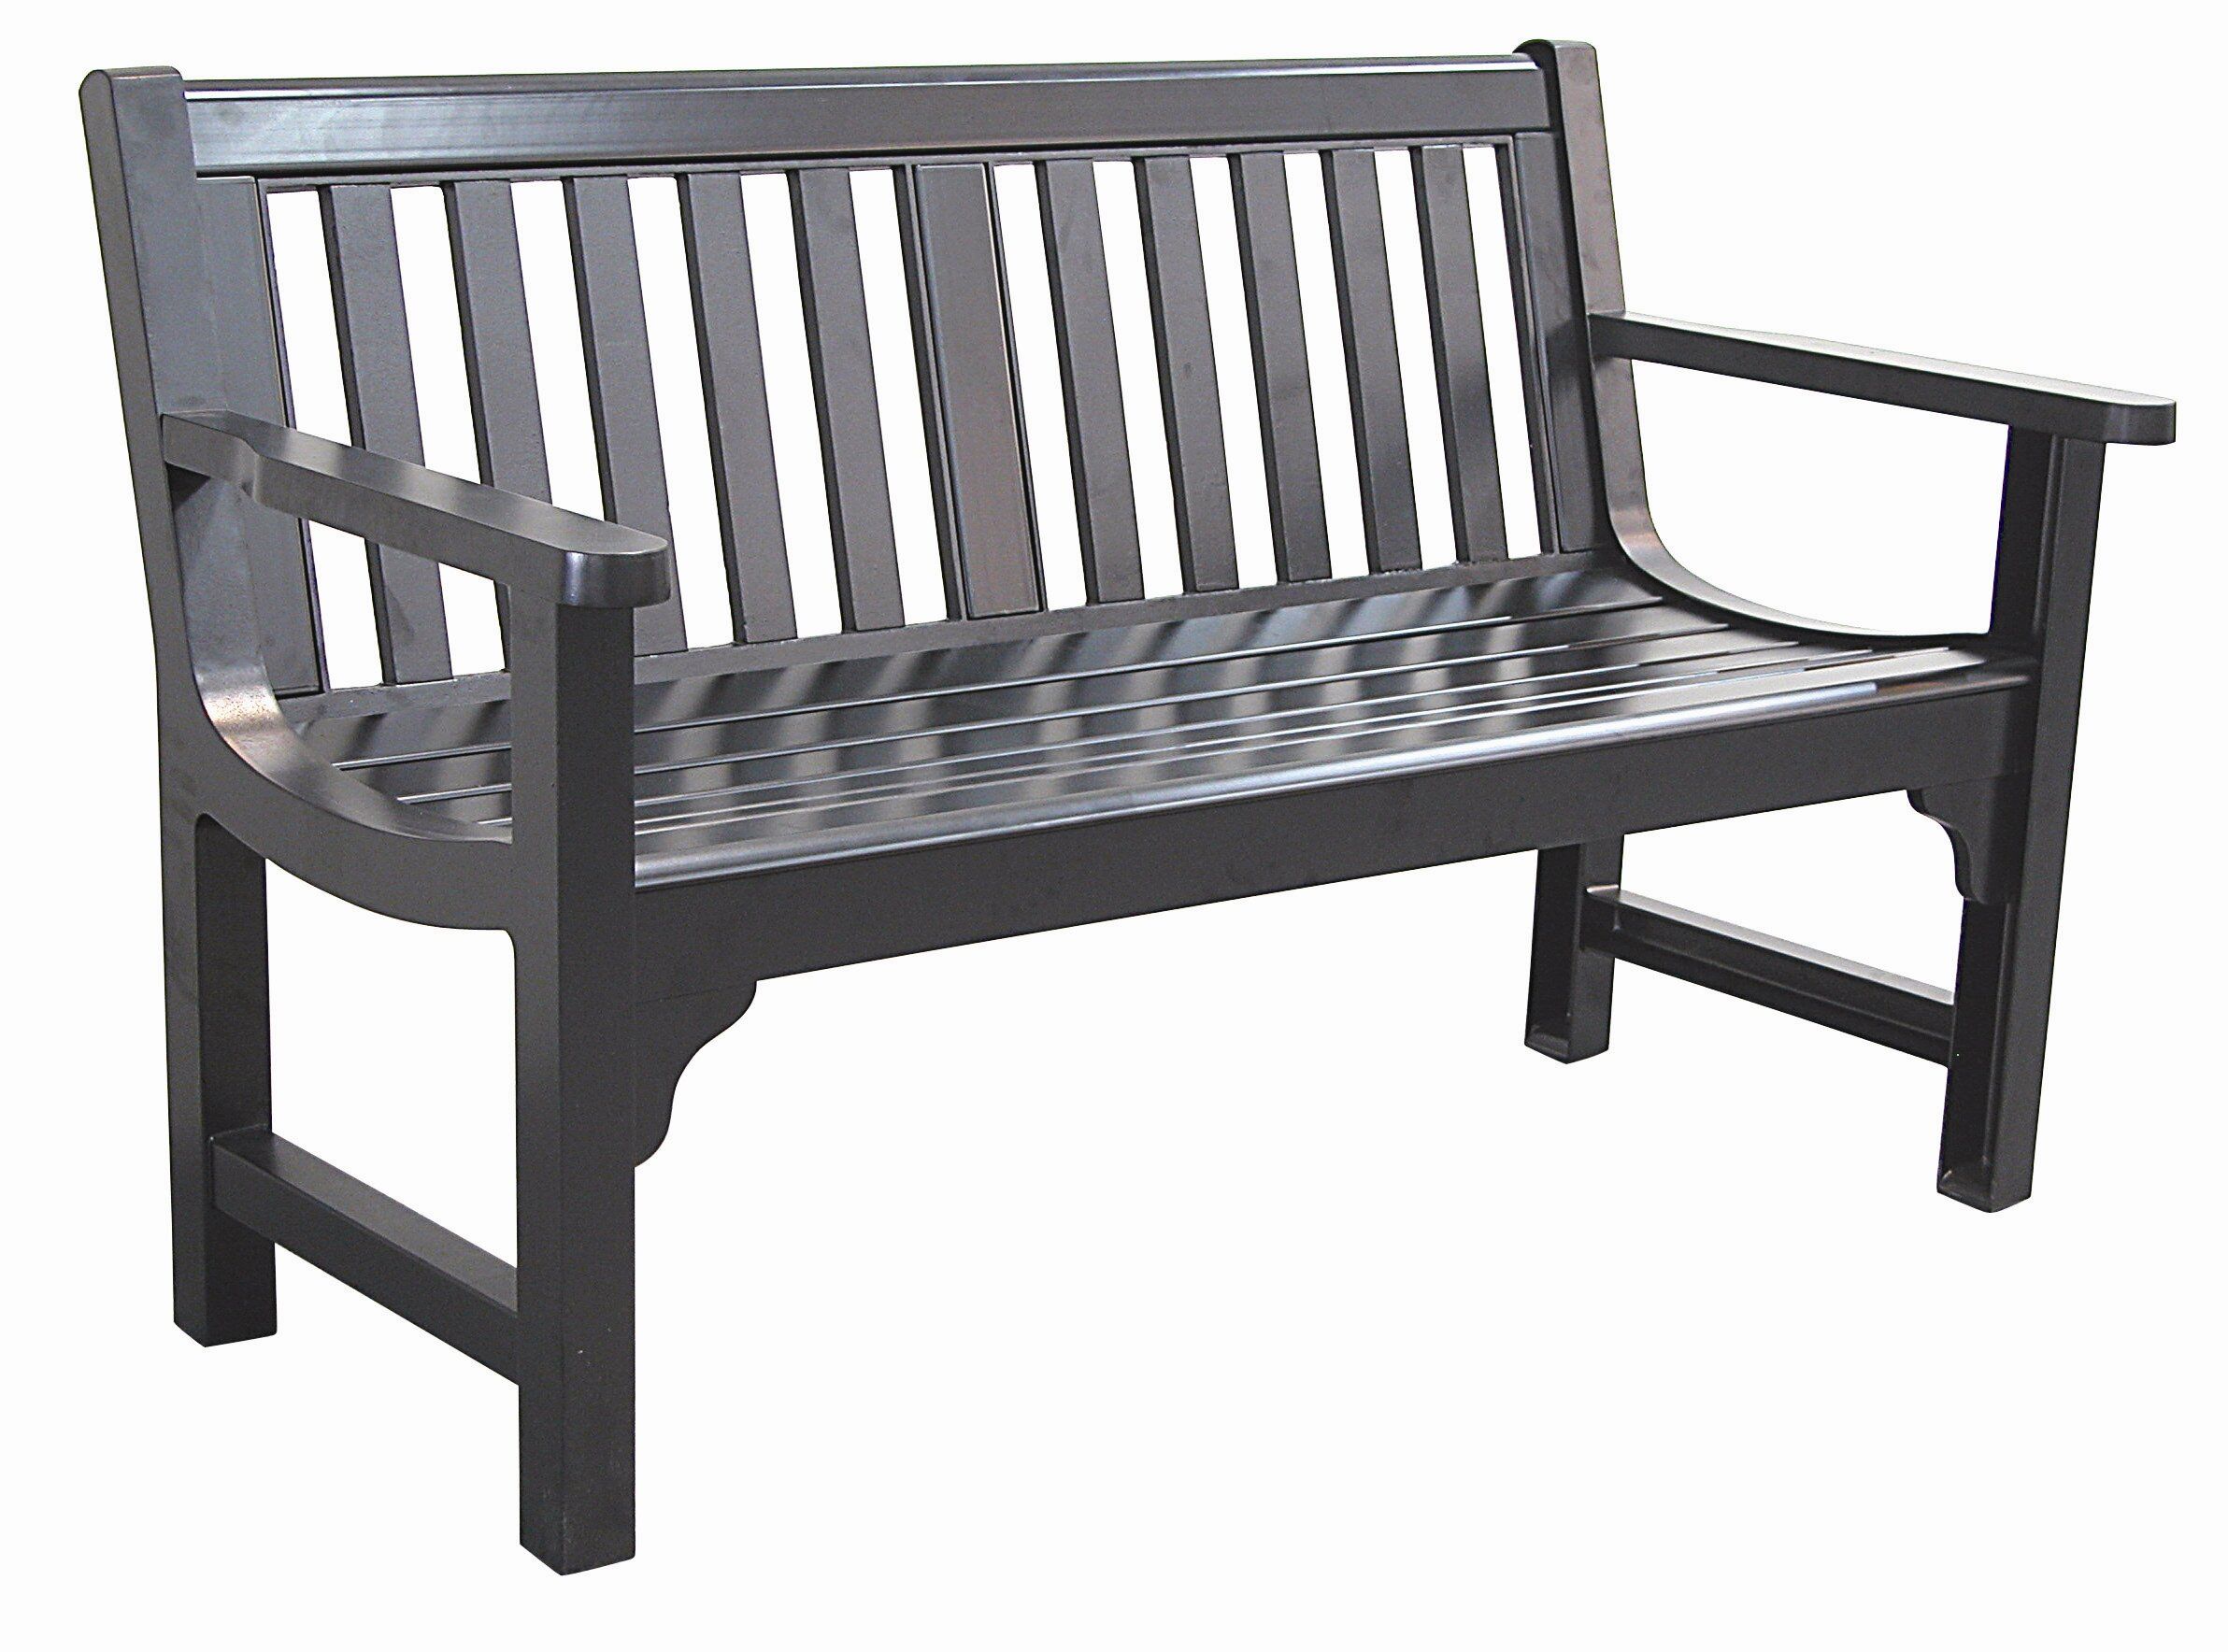 Black Outdoor Benches You'Ll Love In 2020 | Wayfair Inside Aranita Tree Of Life Iron Garden Benches (View 12 of 25)